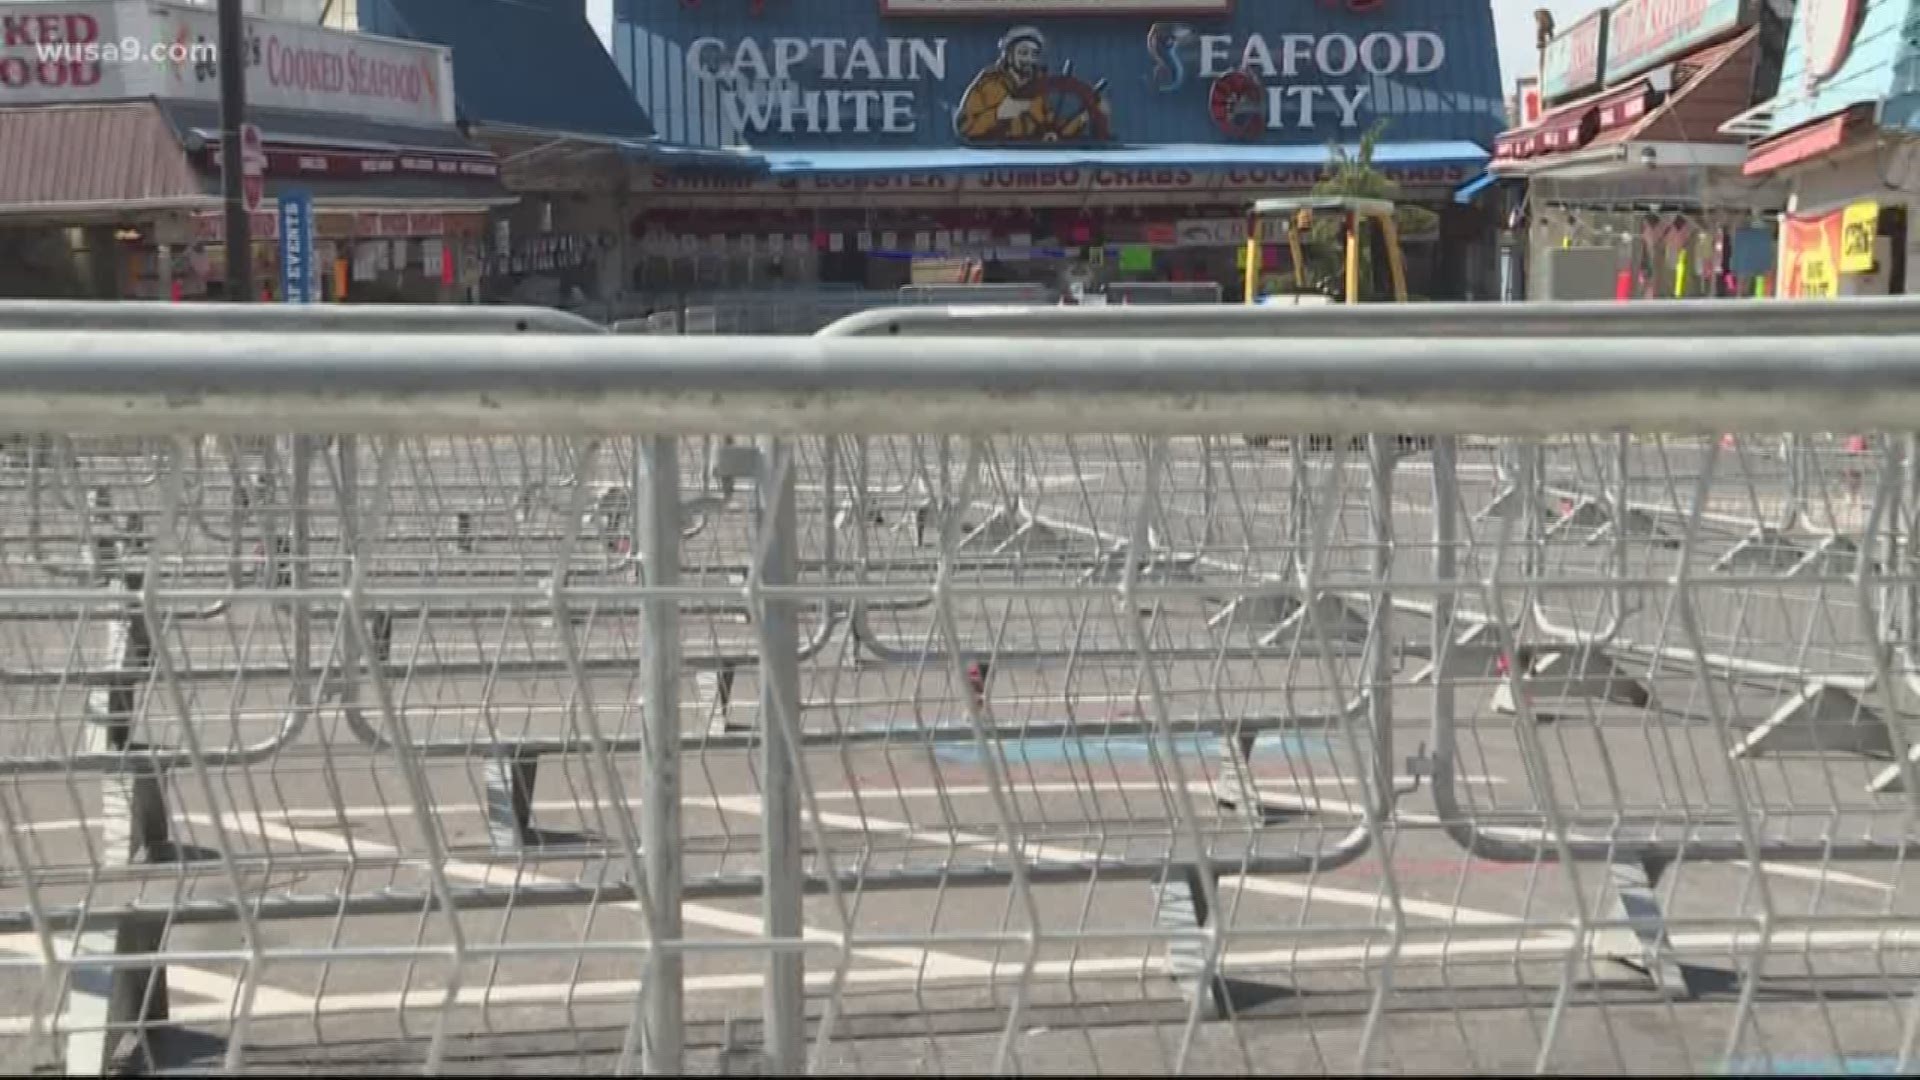 Owner of Captain White's seafood hopes to reopen with new social distance plan and barricades at open air market